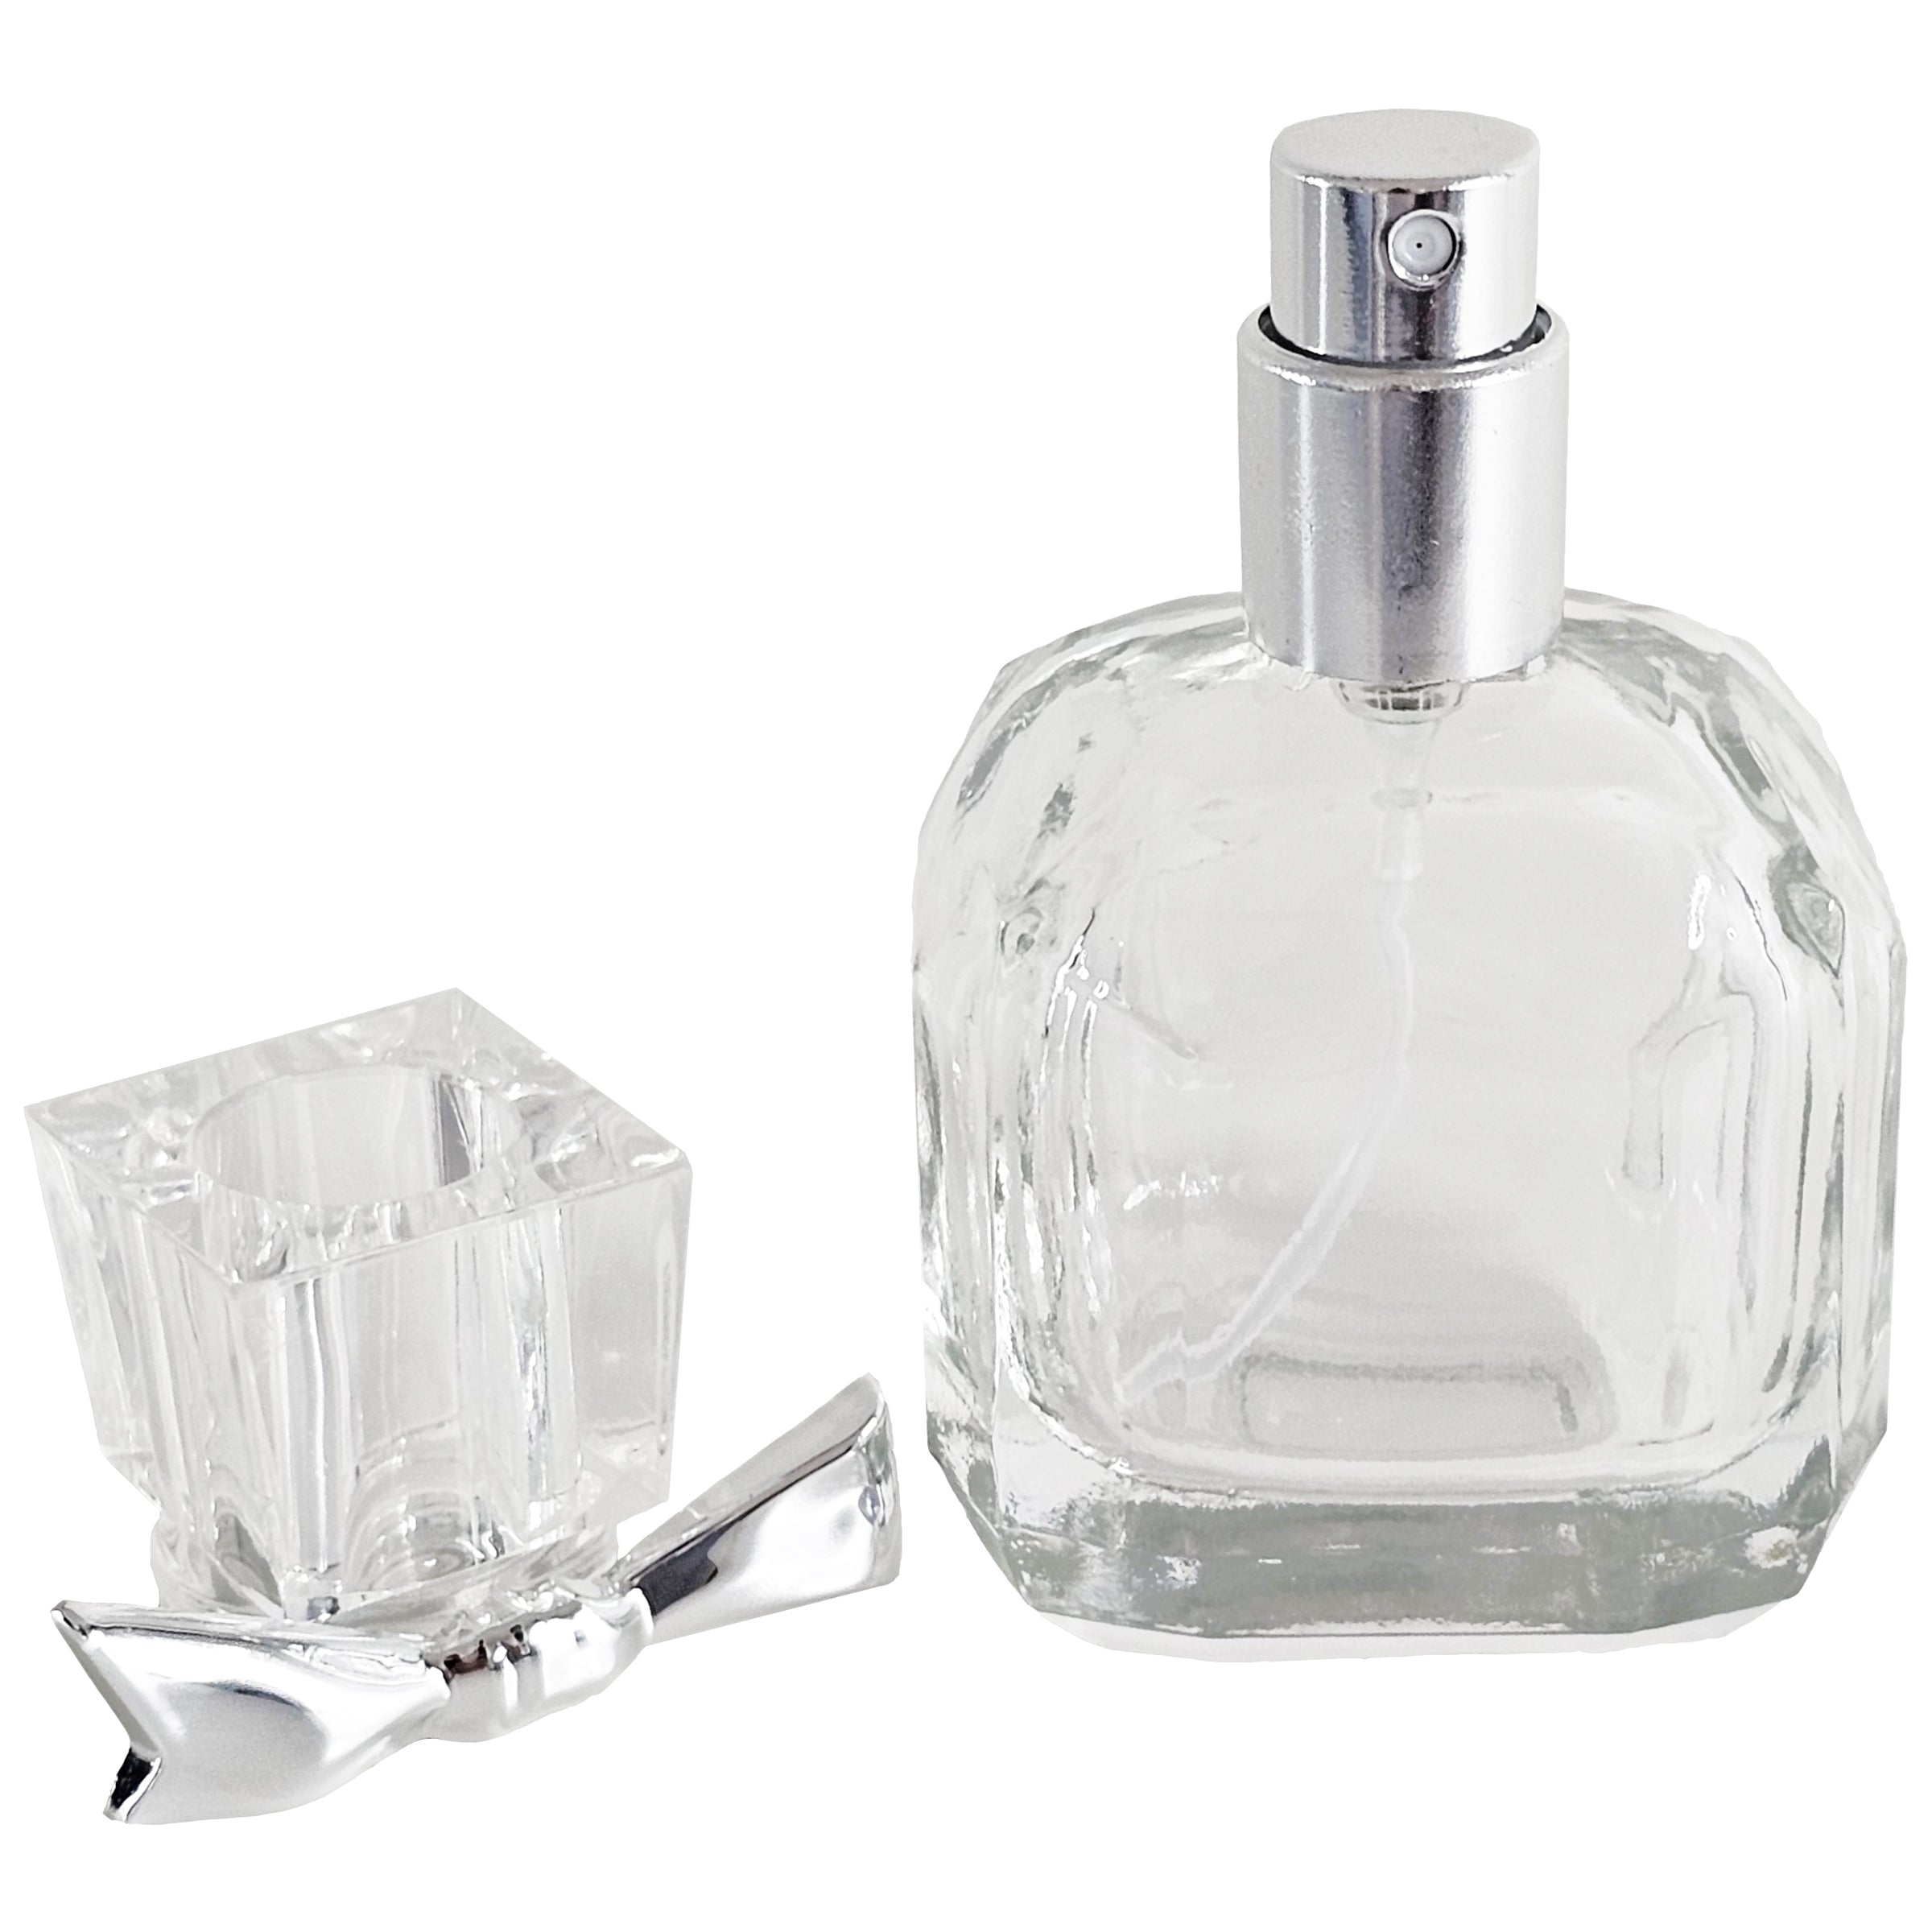 30ml 1oz silver bow tie lid beveled glass thick glass perfume spray bottles